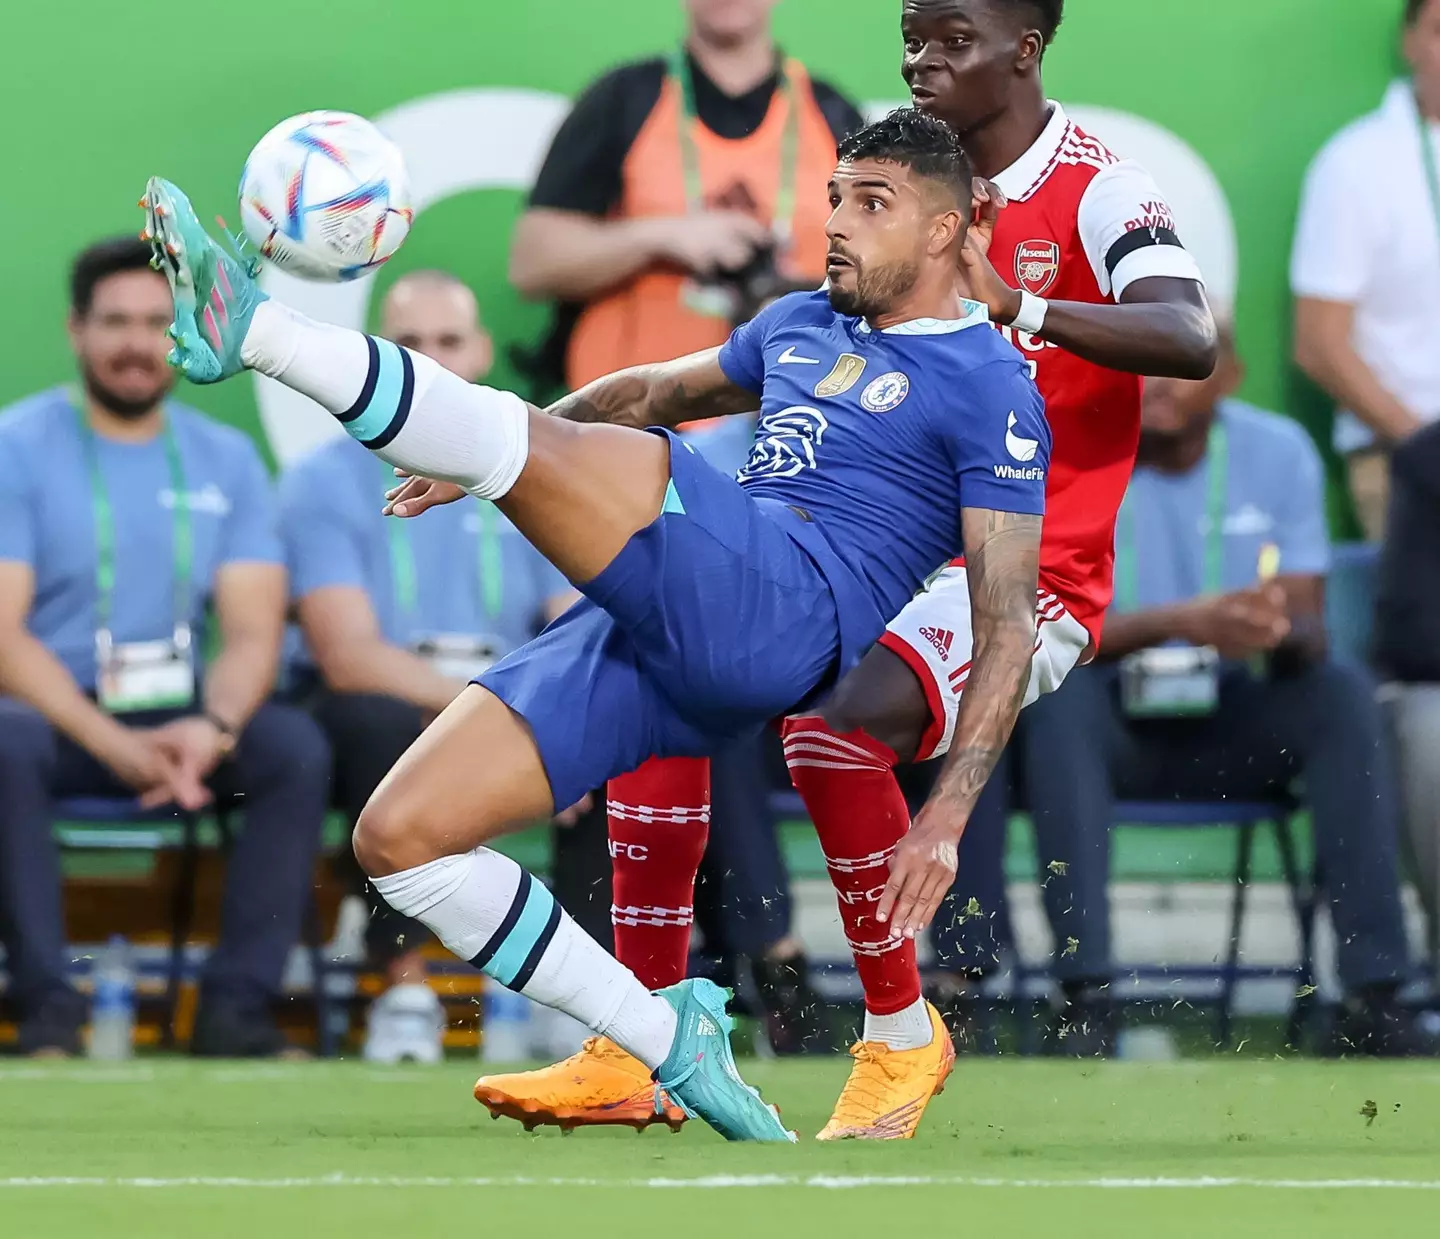 Emerson Palmieri playing against Arsenal in pre-season. (Alamy)